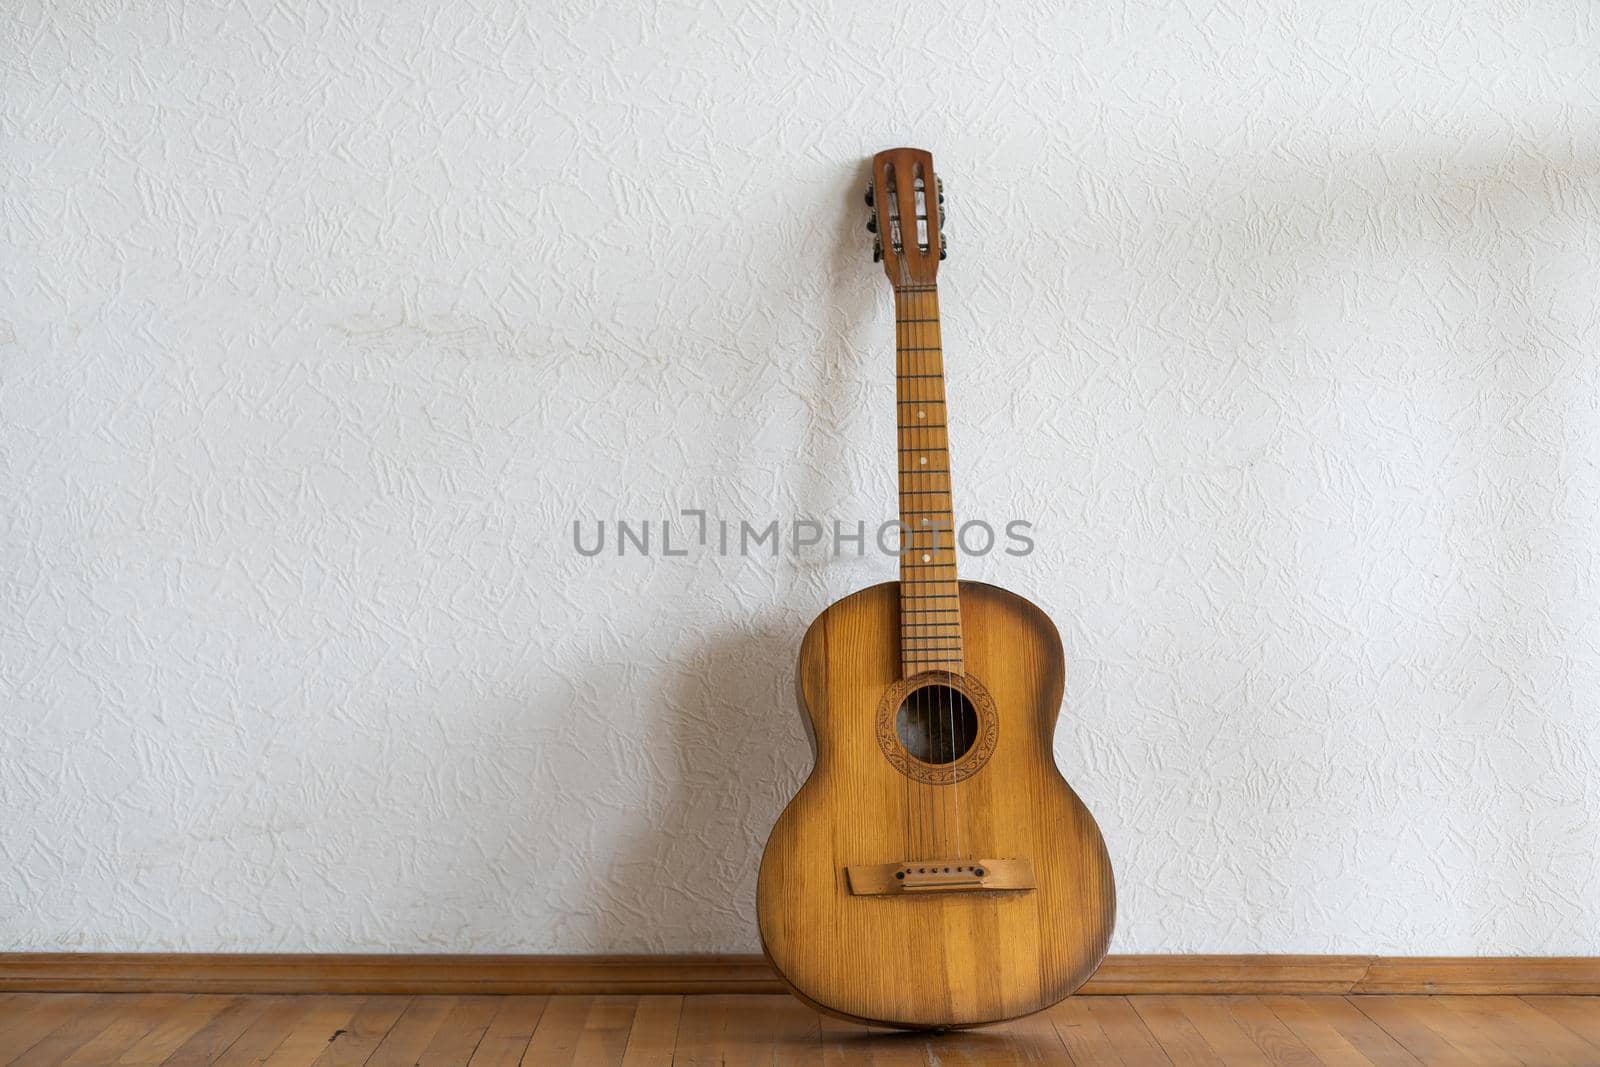 classic guitar lying in front of a wall as background by Andelov13